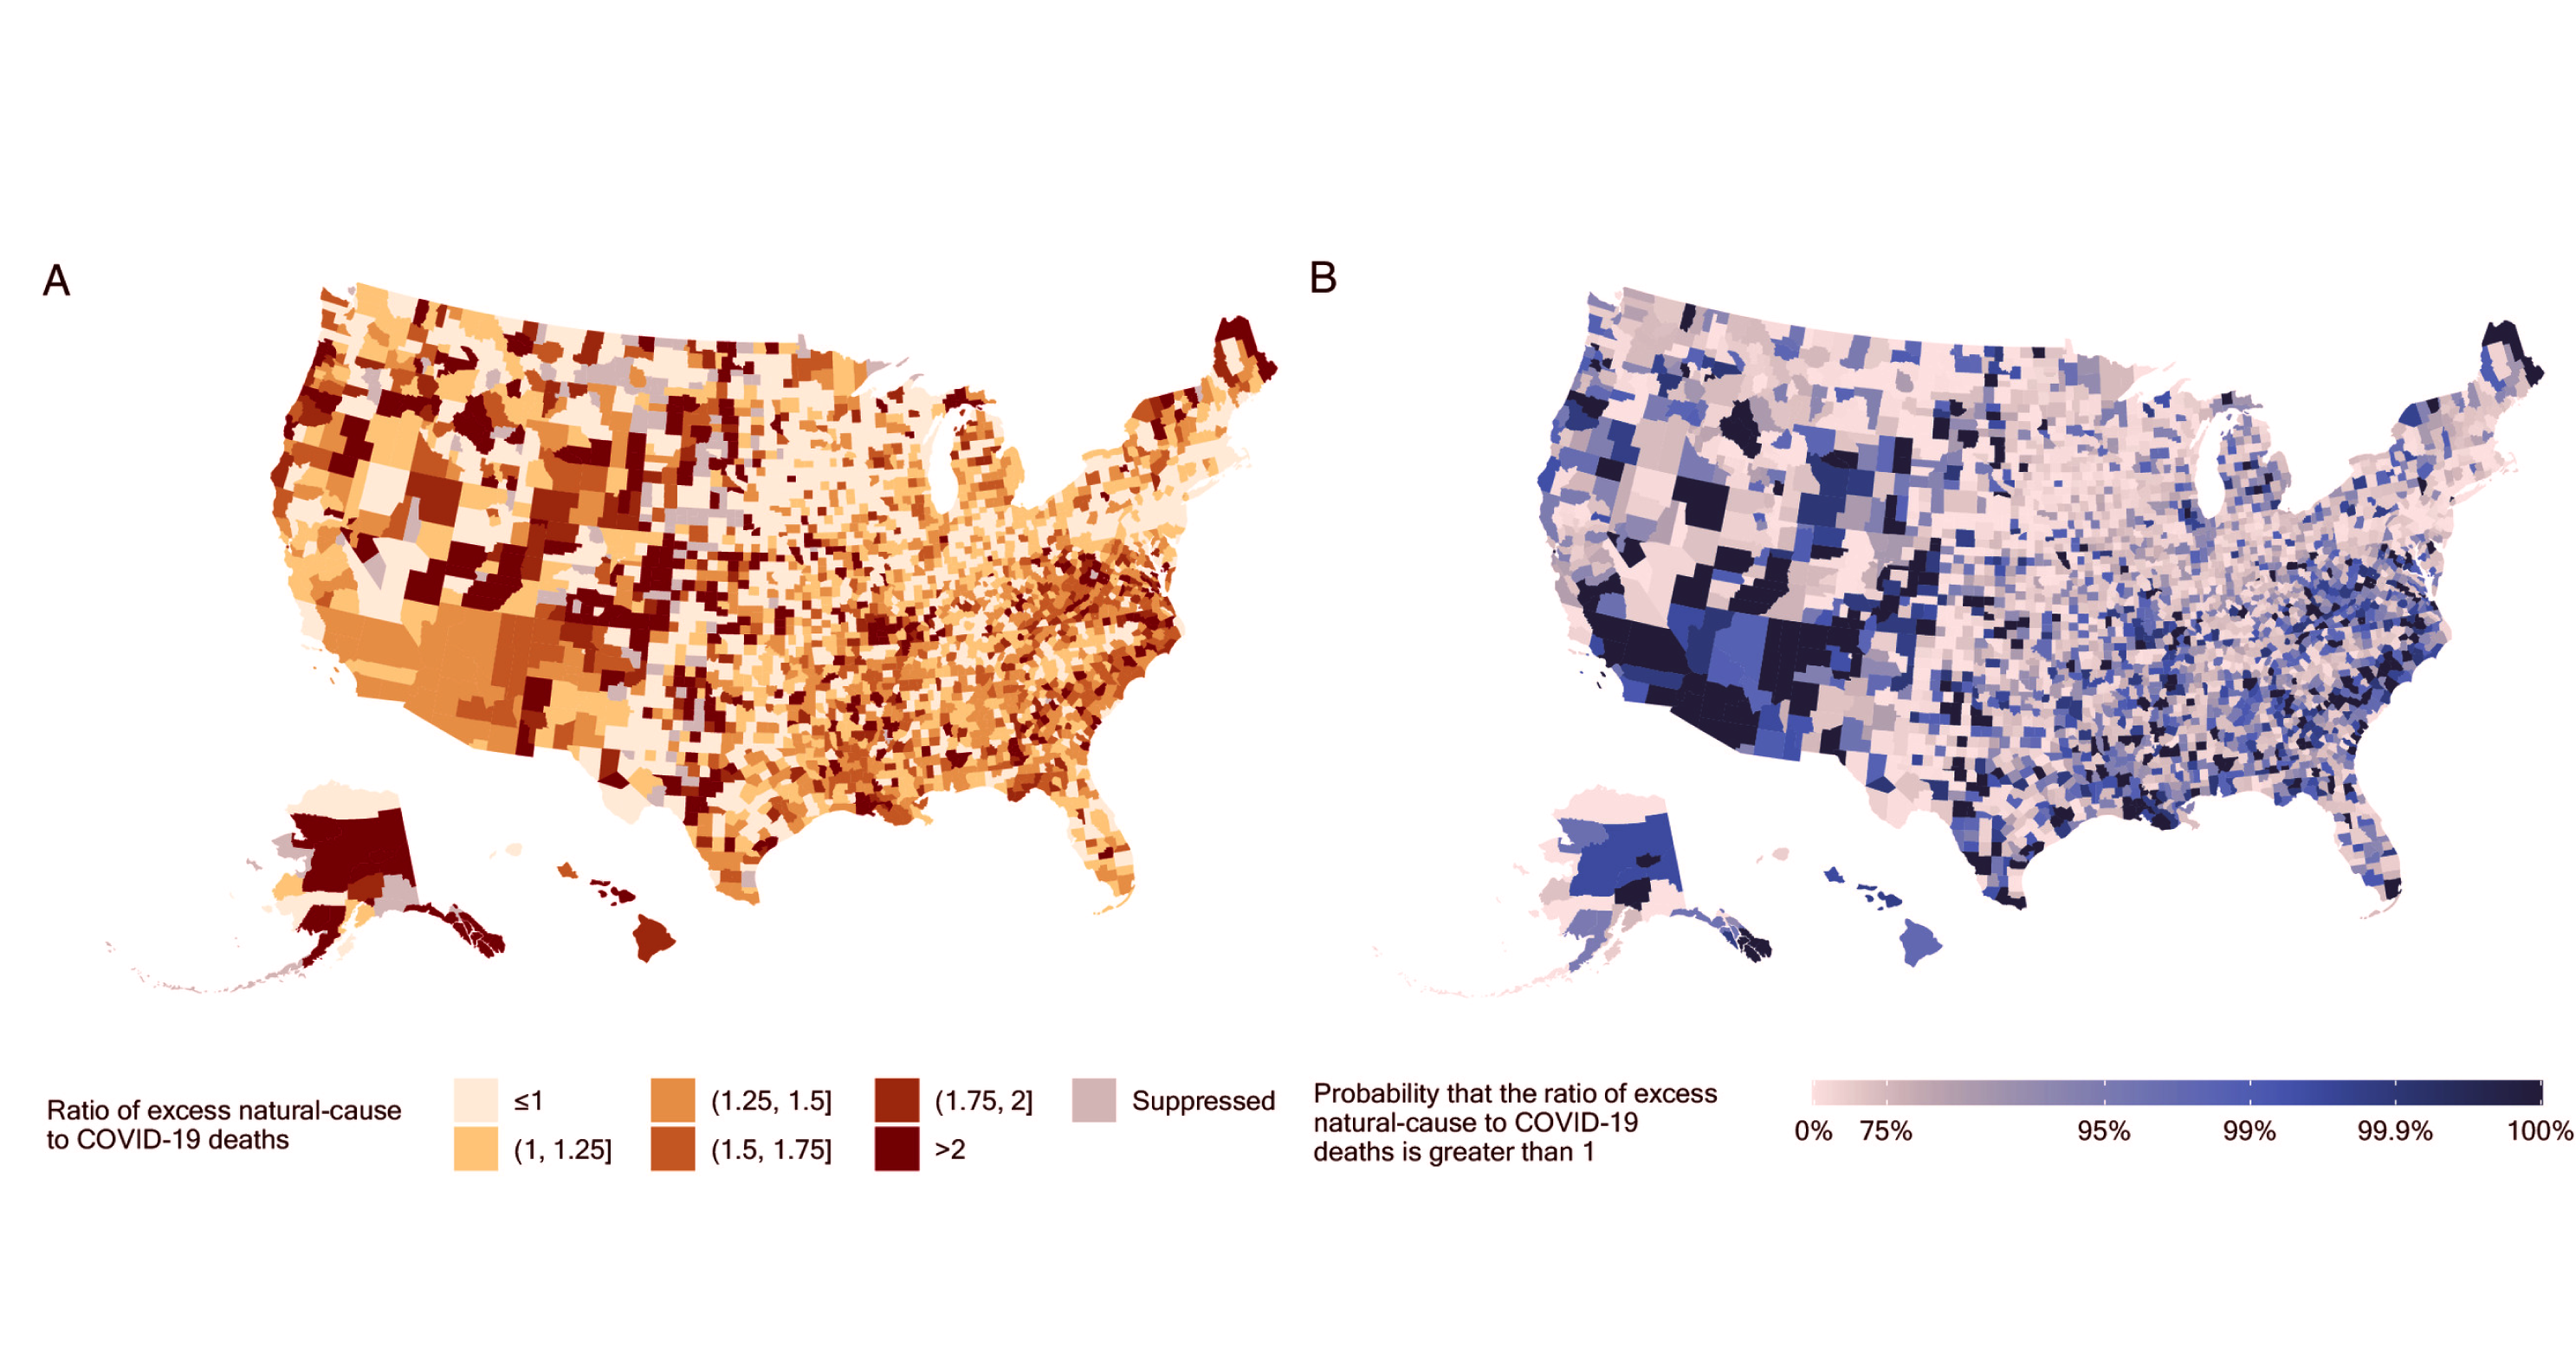 Two maps of the U.S. showing the ratio of excess natural-cause deaths to COVID-19 deaths (Map A) and the probability that this ratio is greater than 1 (Map B), with varying shades representing different data ranges